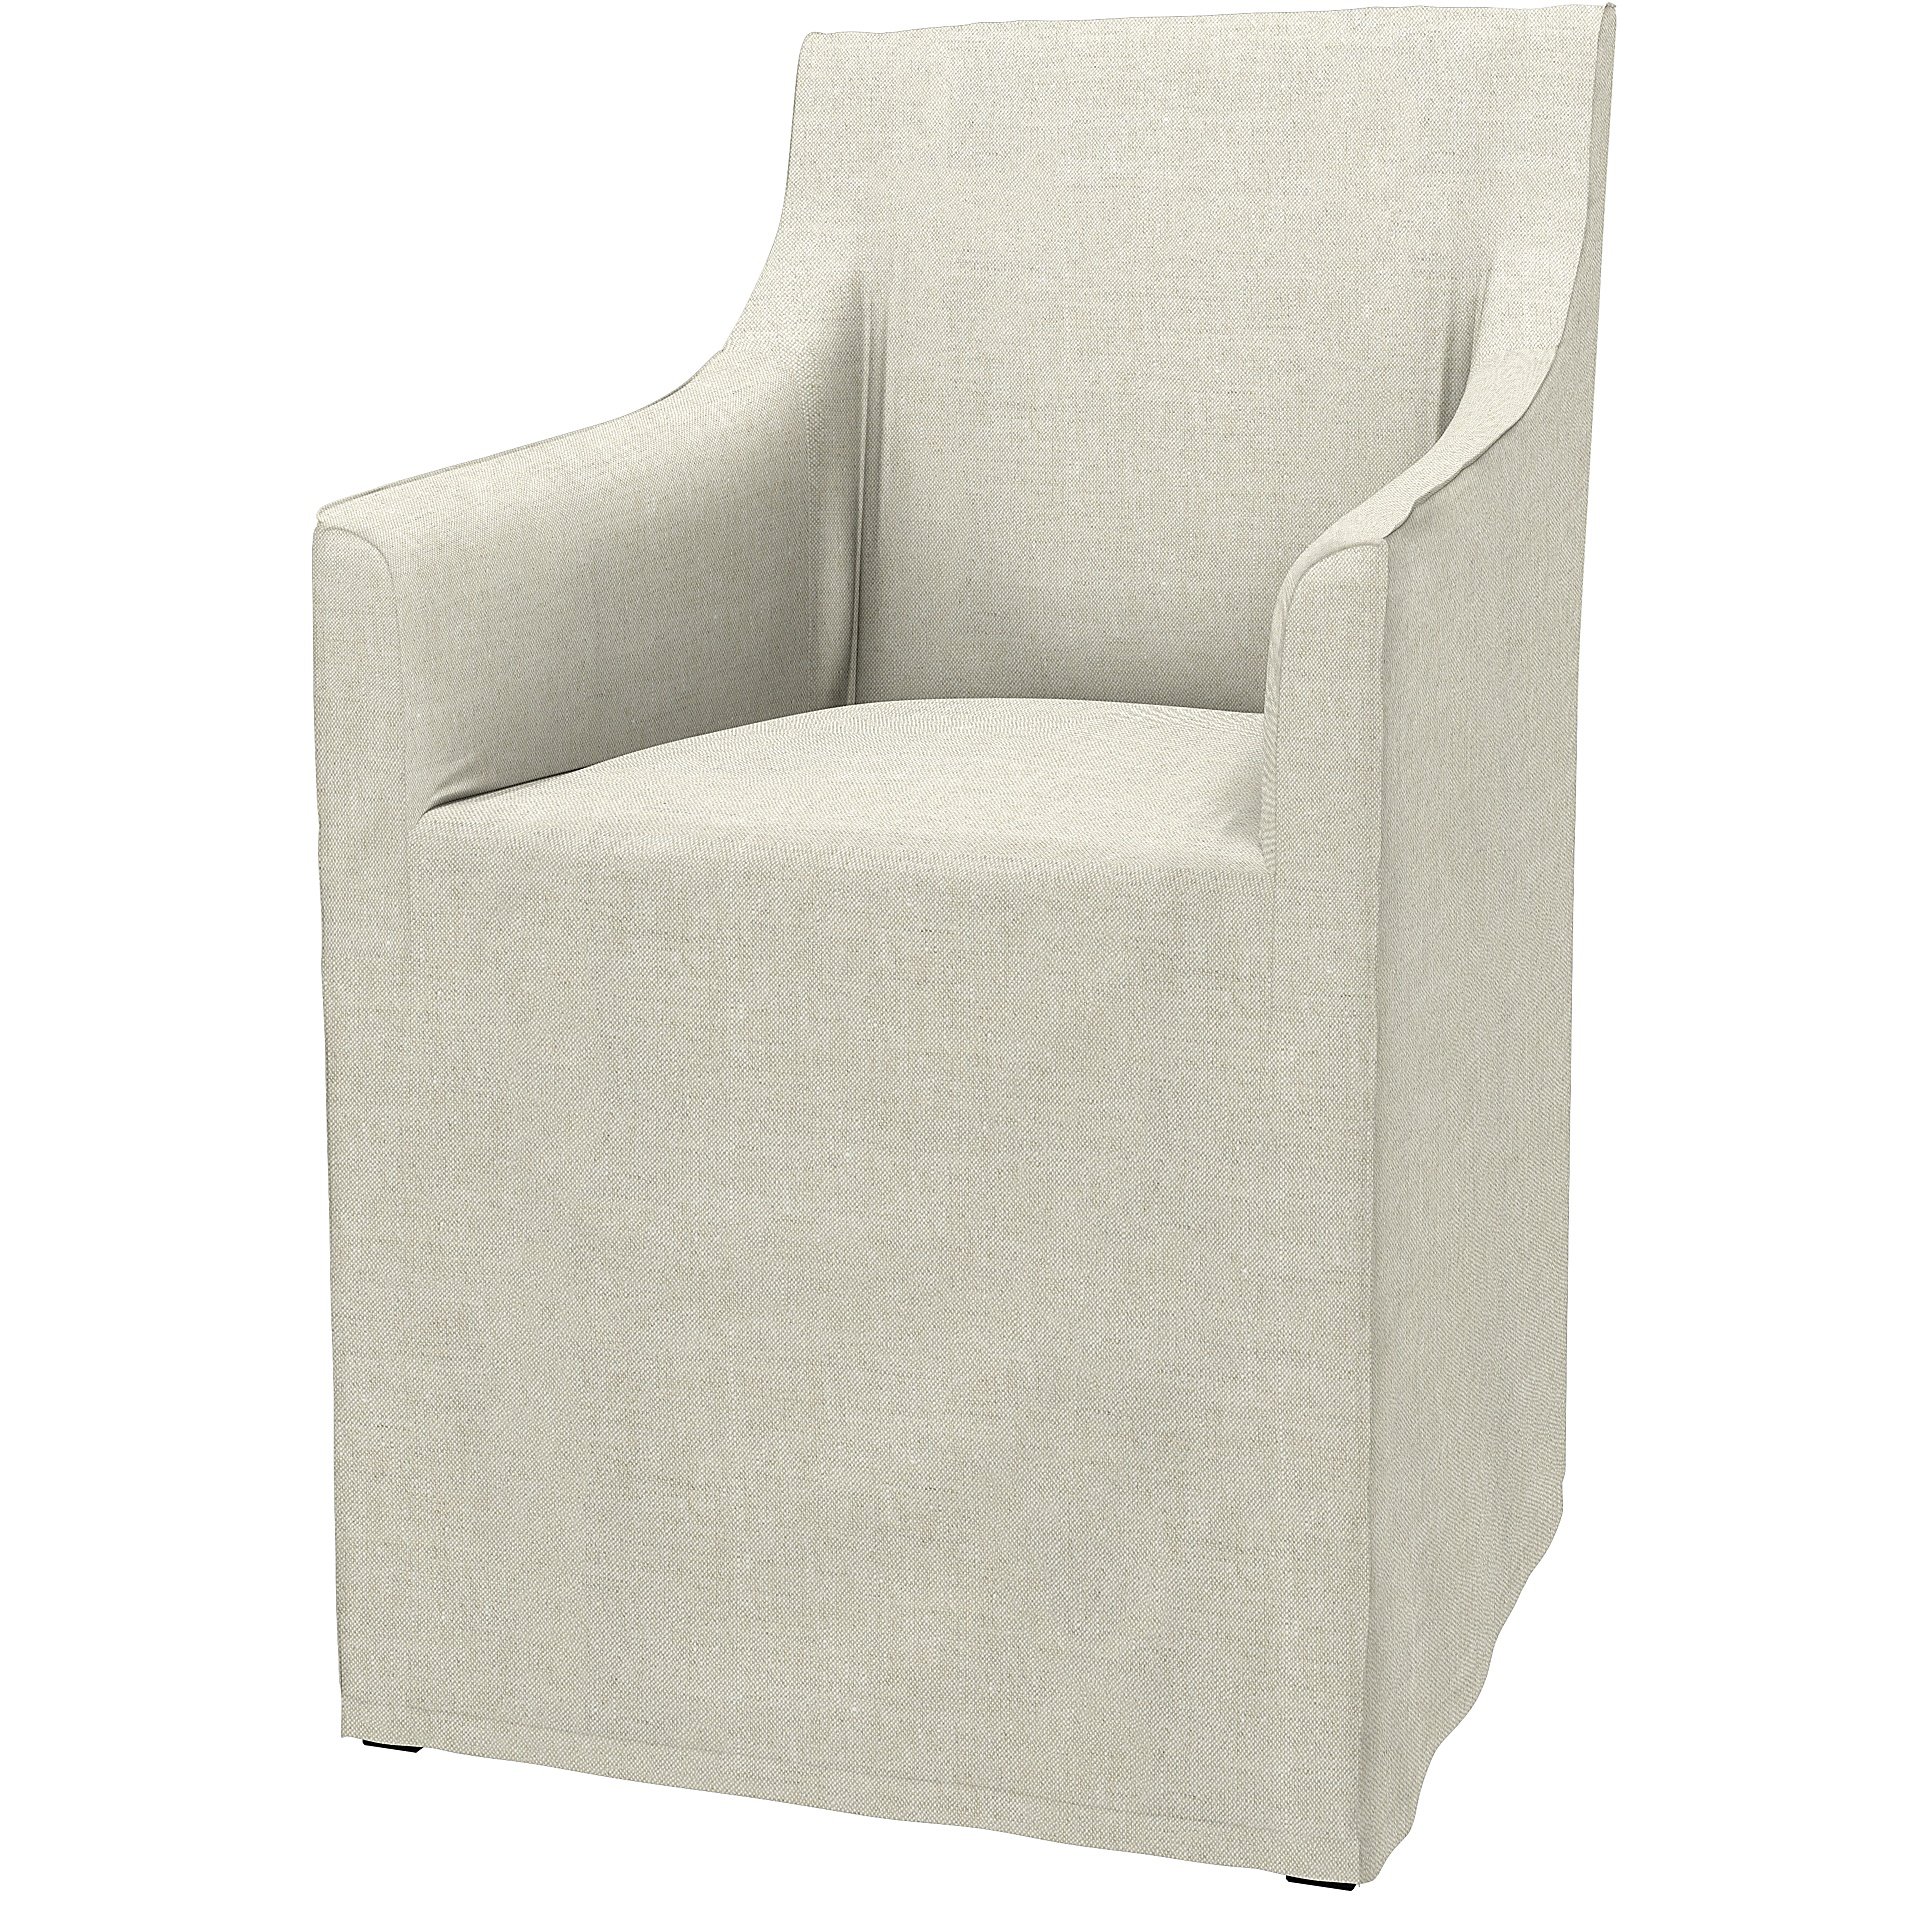 IKEA - Sakarias Chair with Armrests Cover, Natural, Linen - Bemz